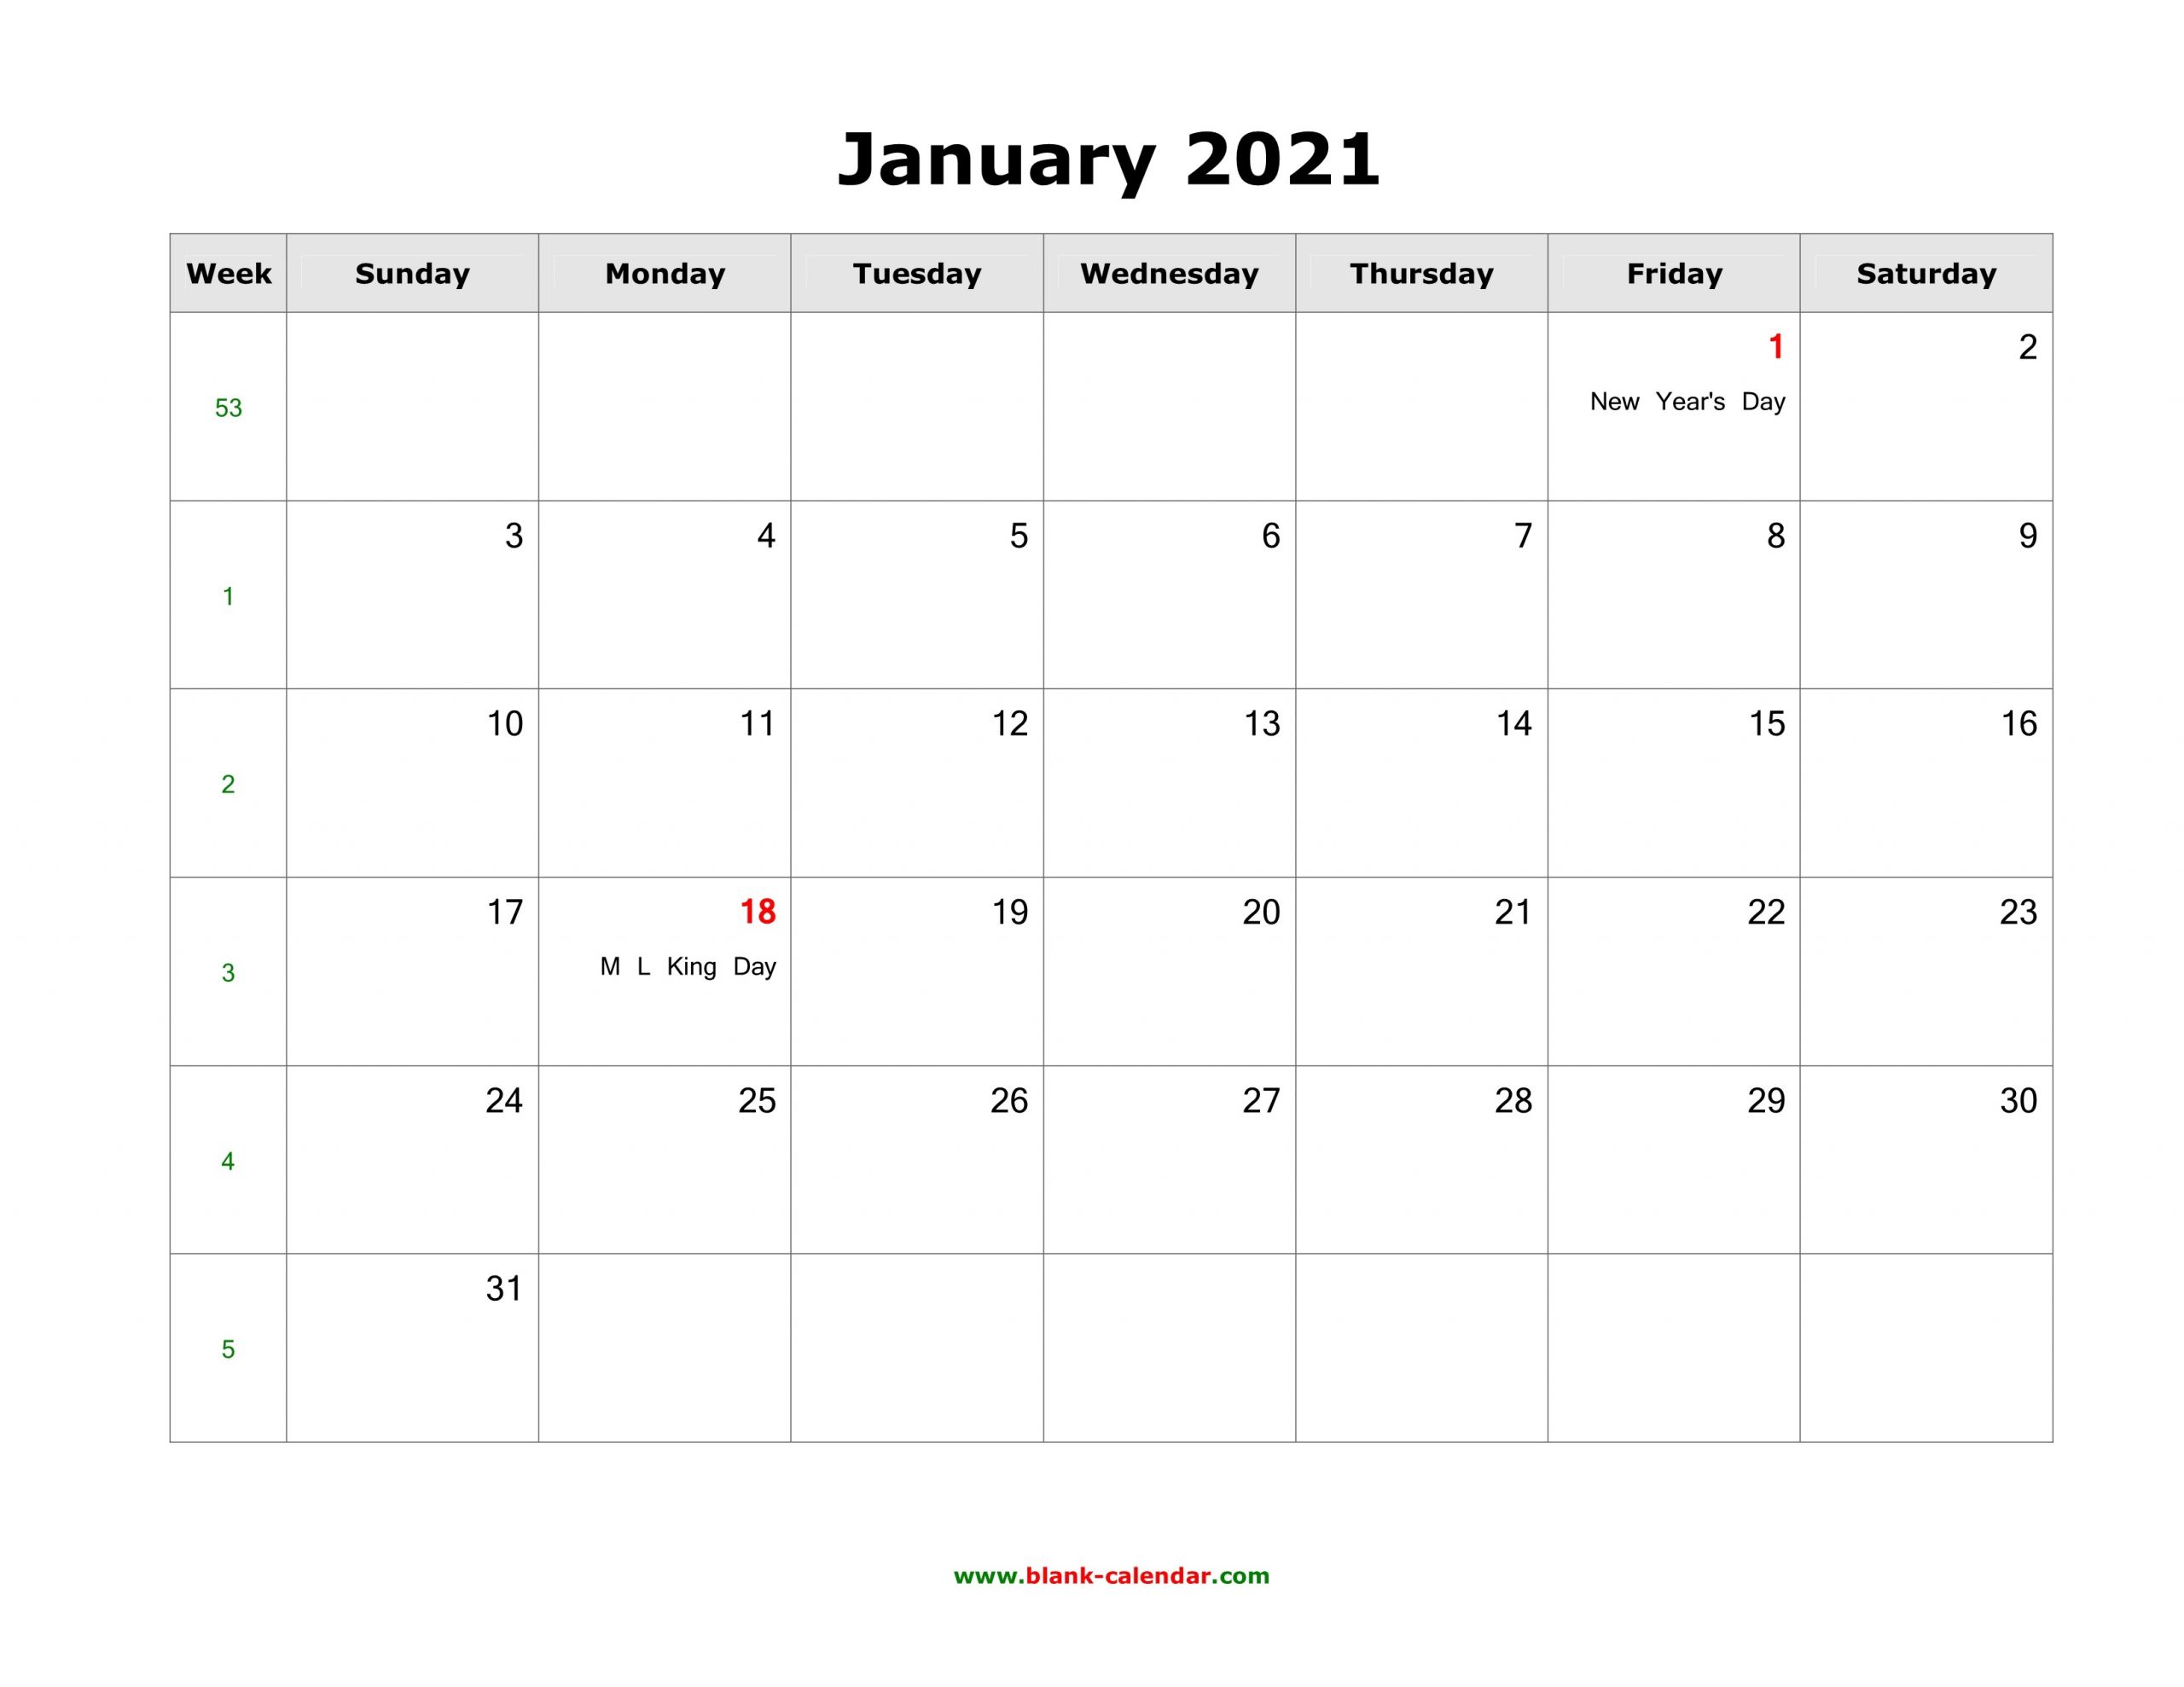 Download Blank Calendar 2021 with US Holidays 12 pages one